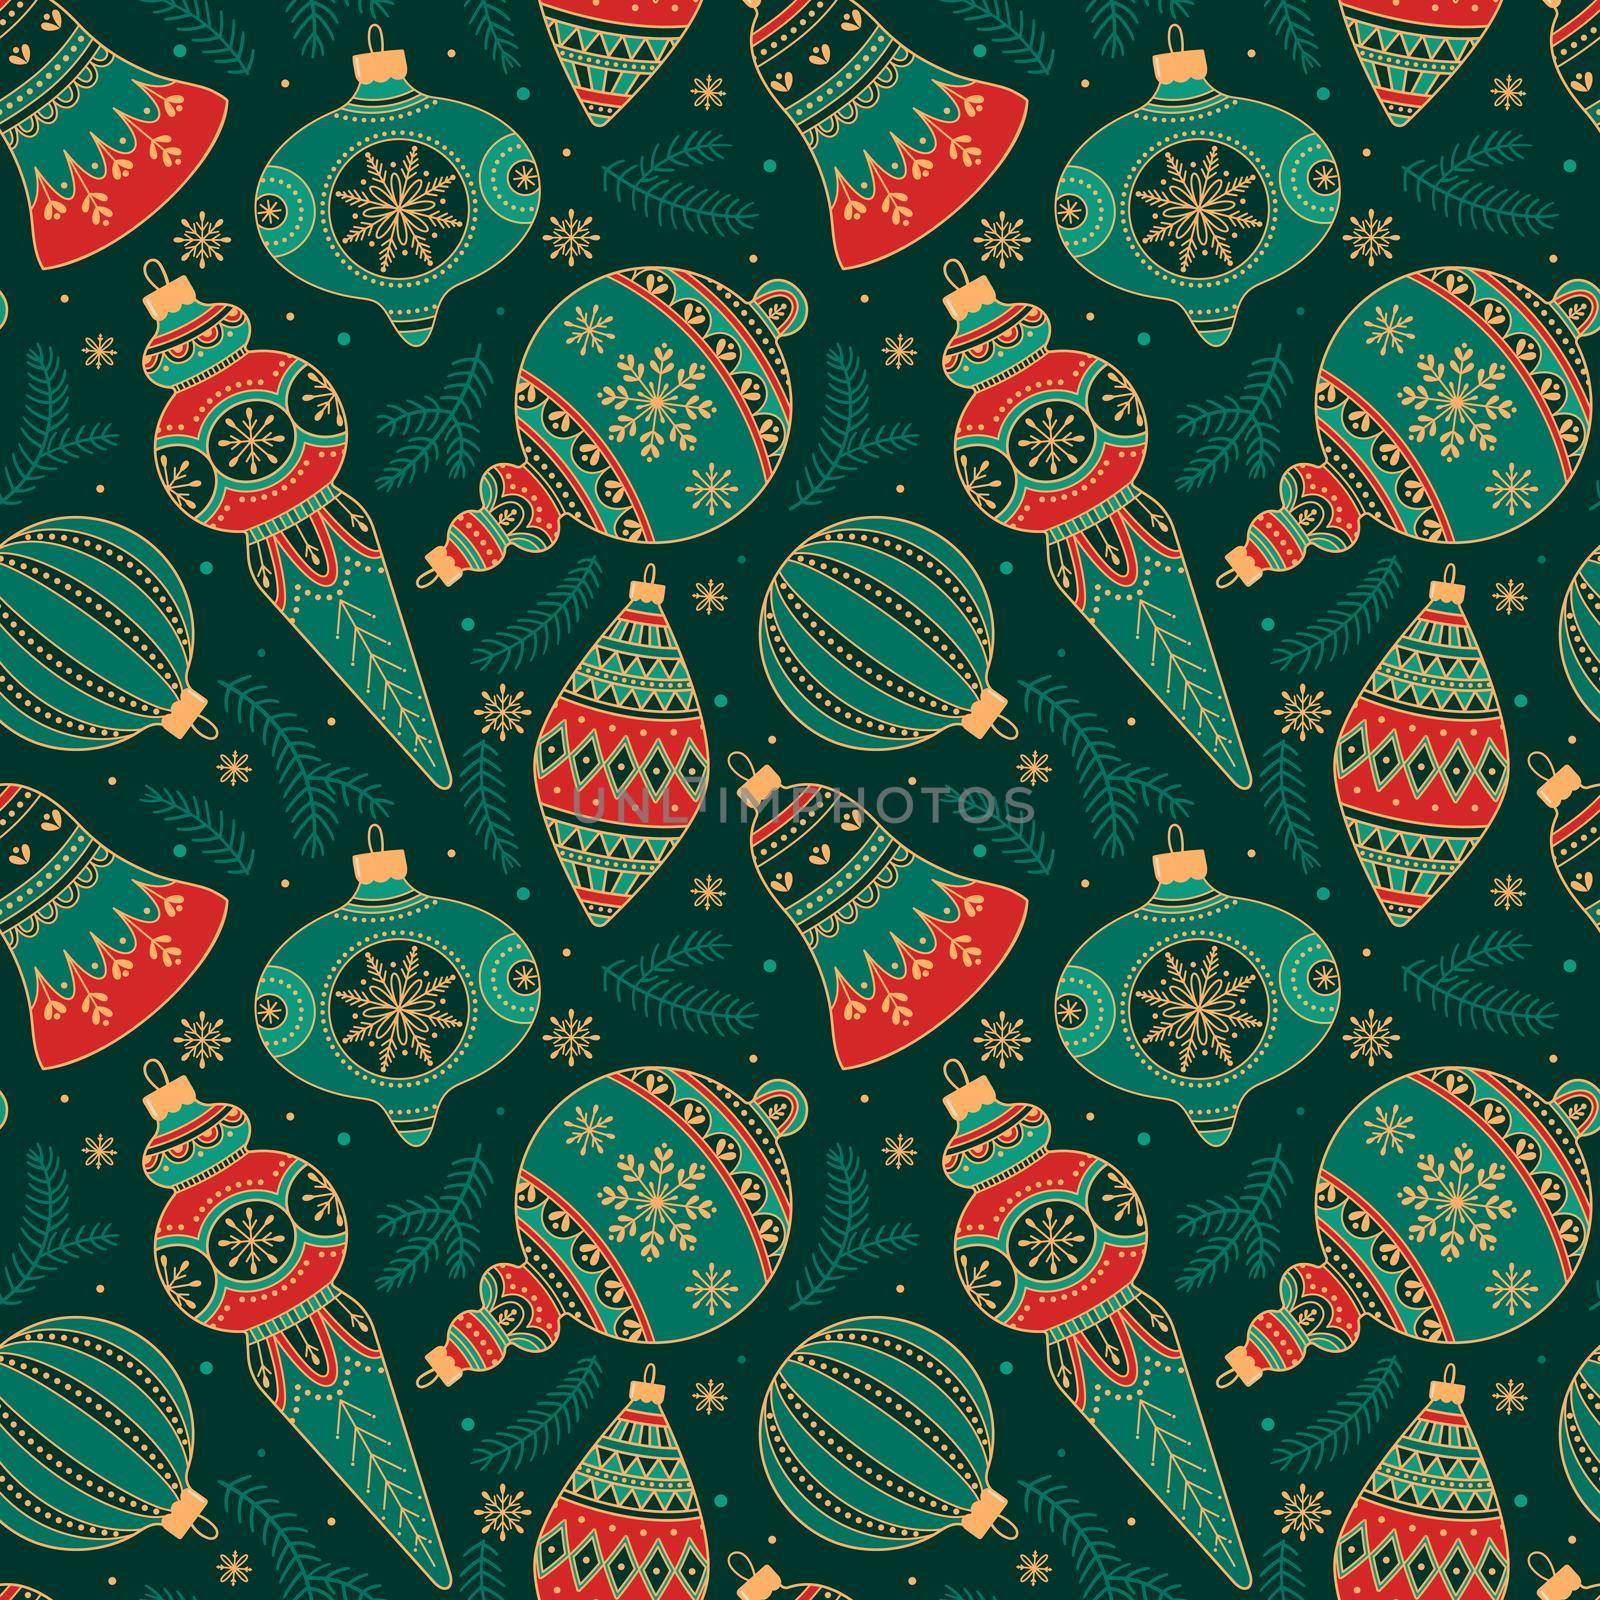 Seamless pattern with Christmas decor. Vector illustration for Christmas and New Year. by Lena_Khmelniuk